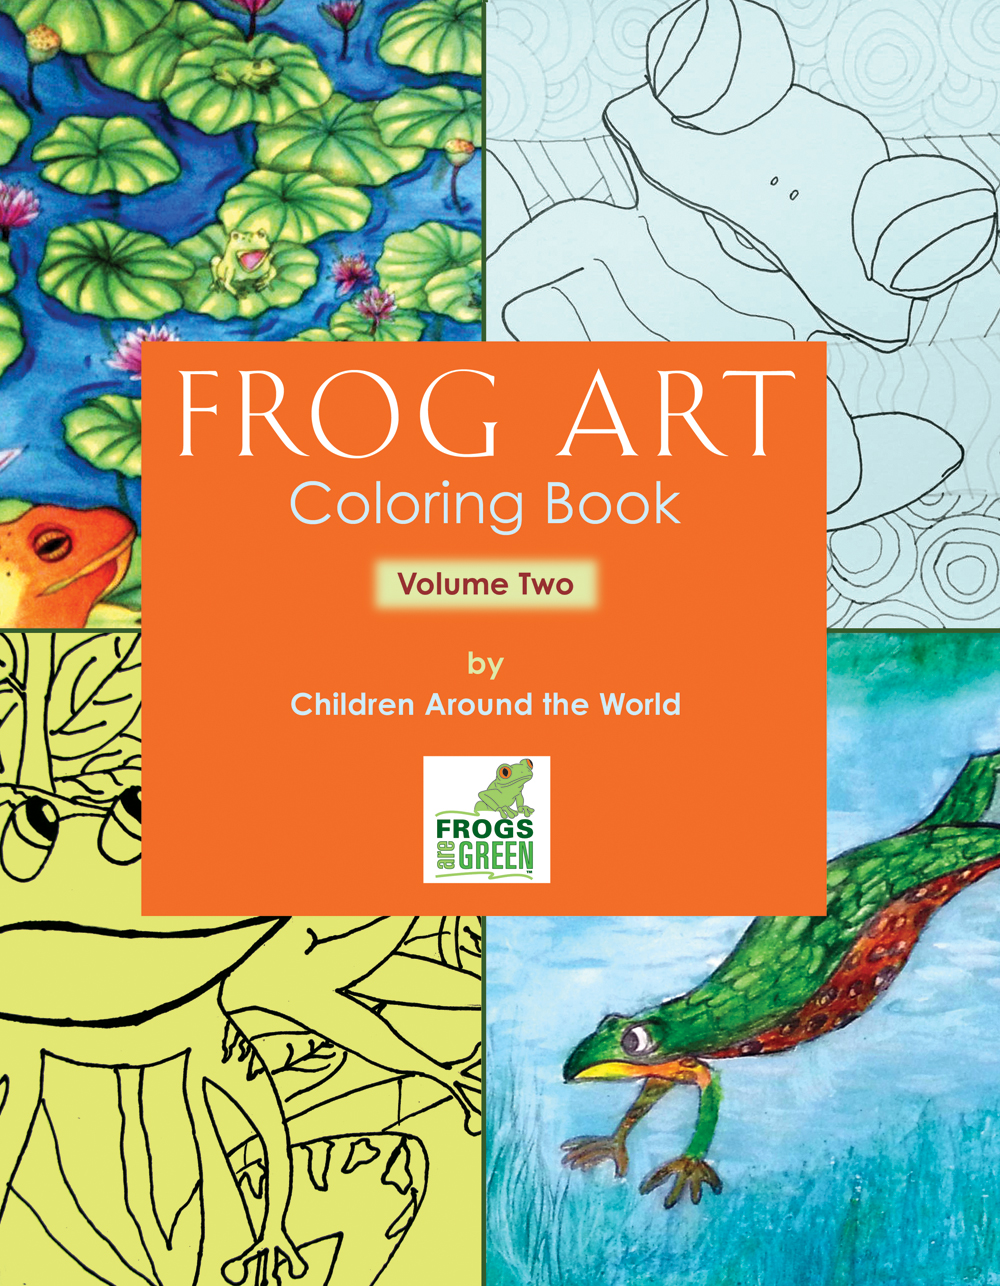 FROG ART coloring book volume two by Frogs Are Green